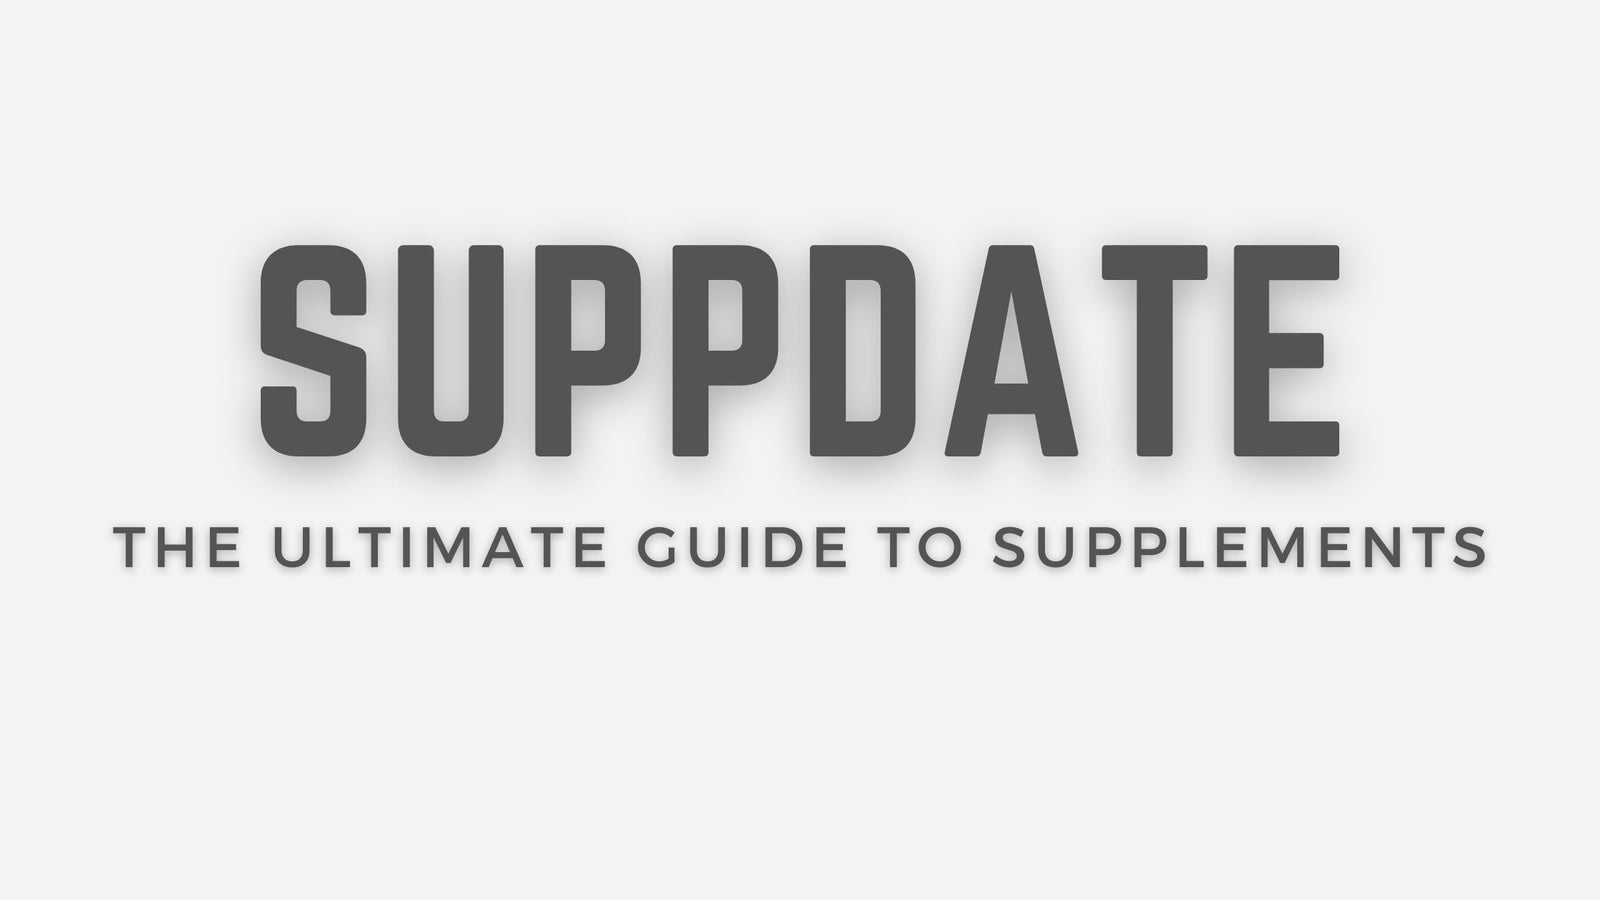 The Ultimate Guide to Supplements - The Supps House LTD